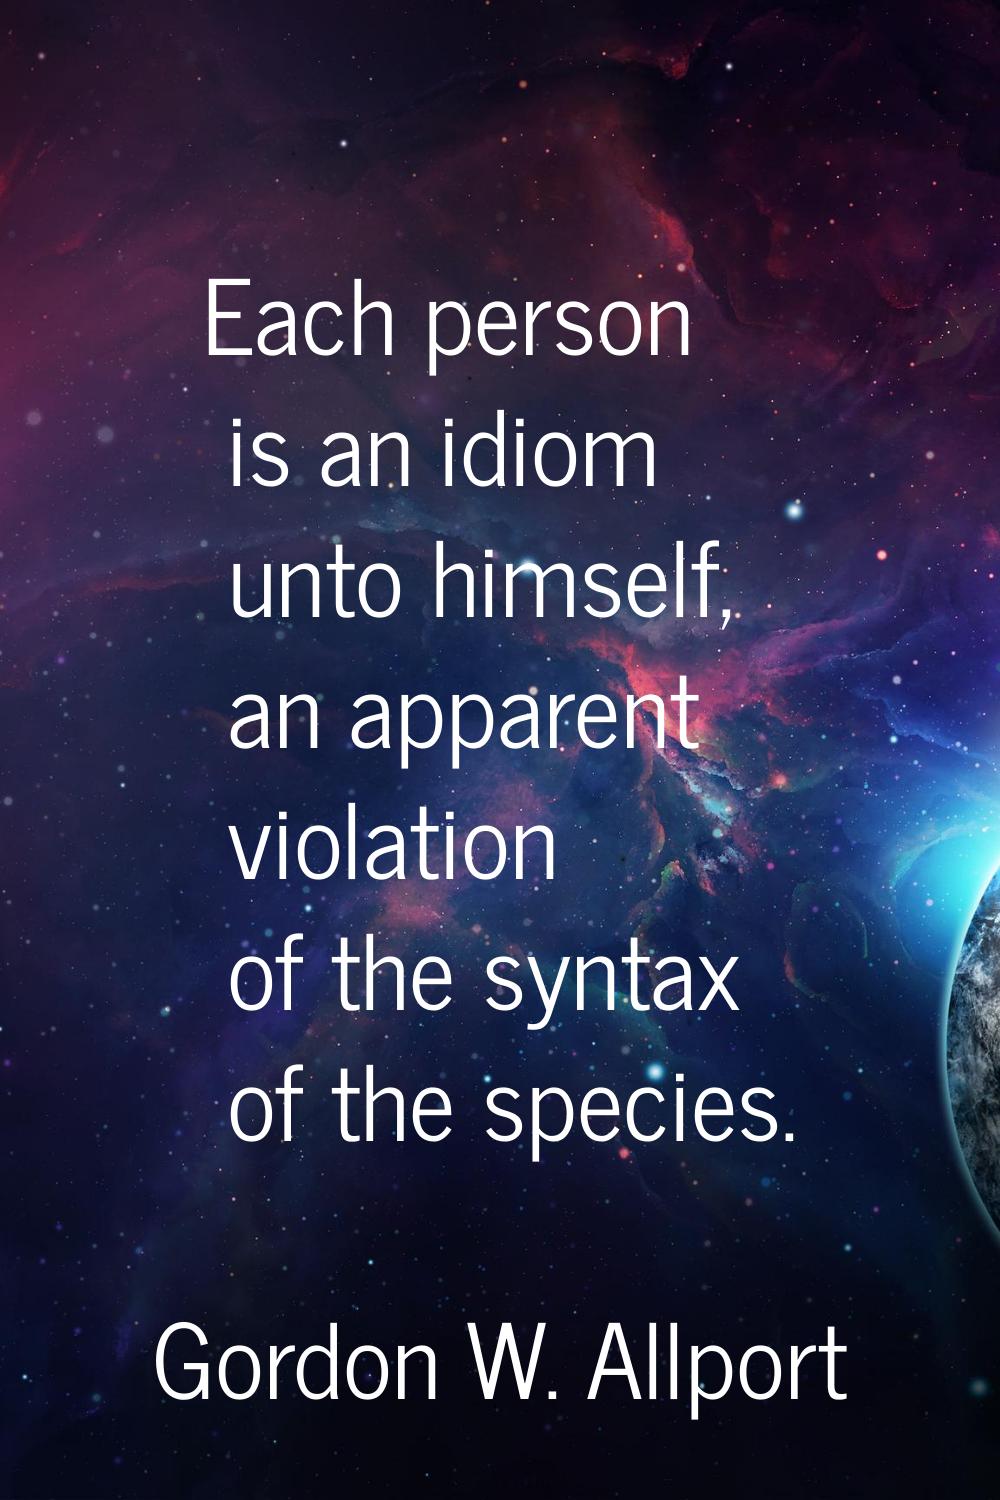 Each person is an idiom unto himself, an apparent violation of the syntax of the species.